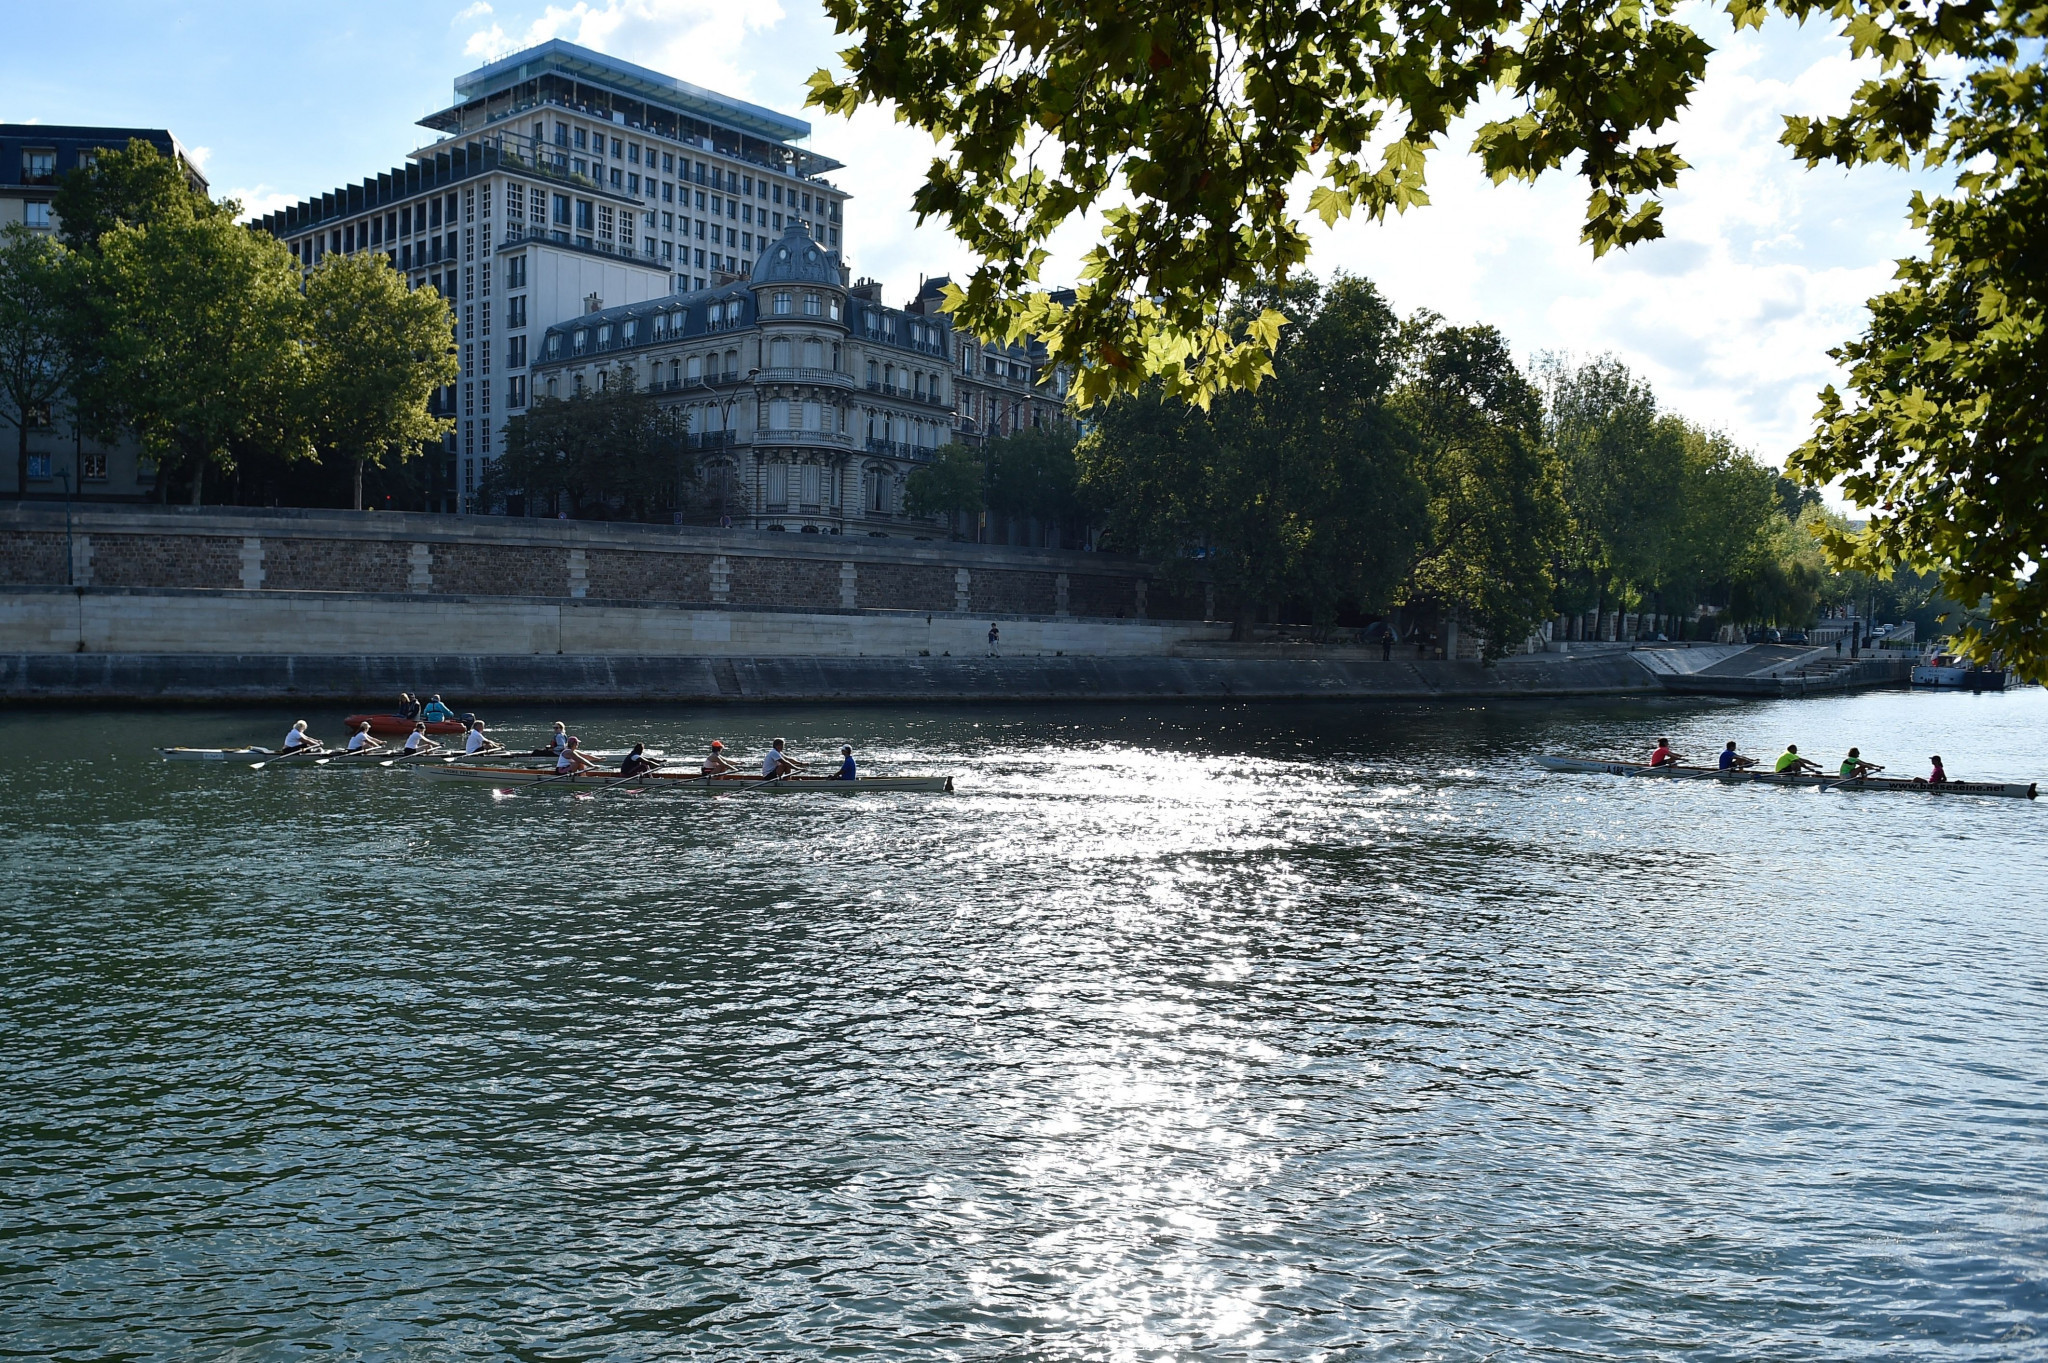 The IOC rejected the possibility of coastal rowing appearing at Paris 2024 ©Getty Images